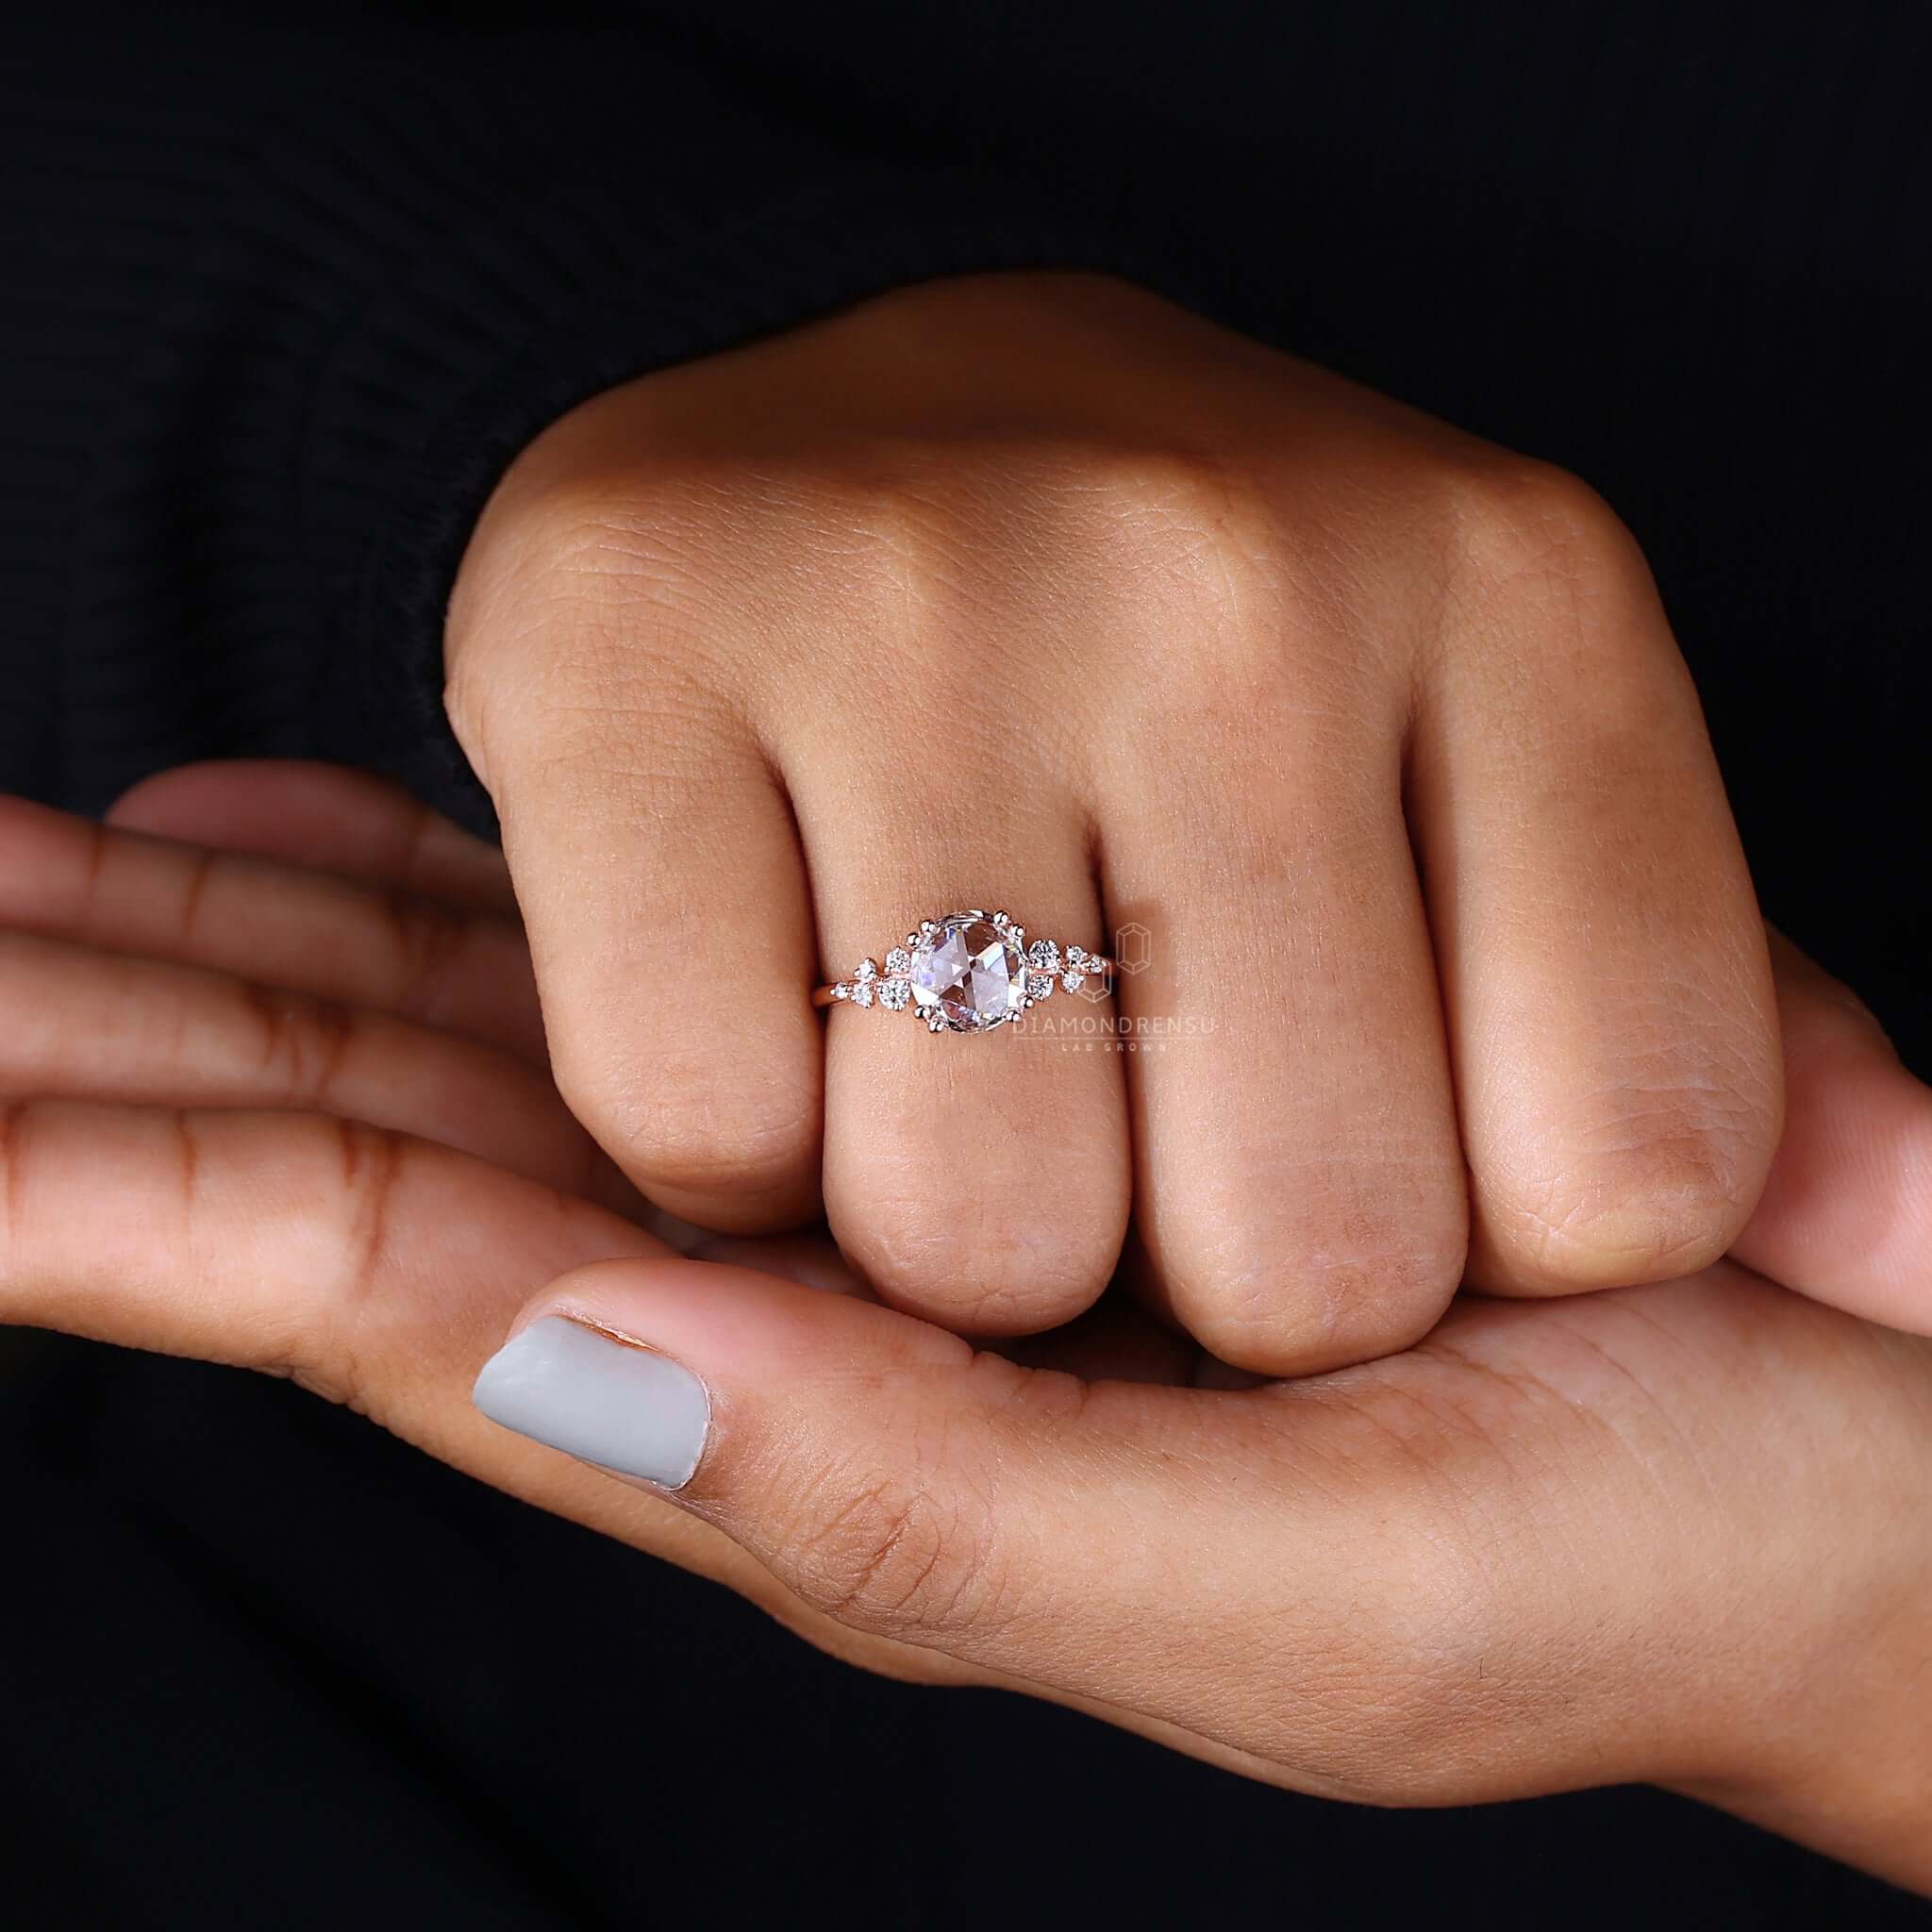 Hand delicately holding a rose cut diamond ring, highlighting its understated elegance and refined style.